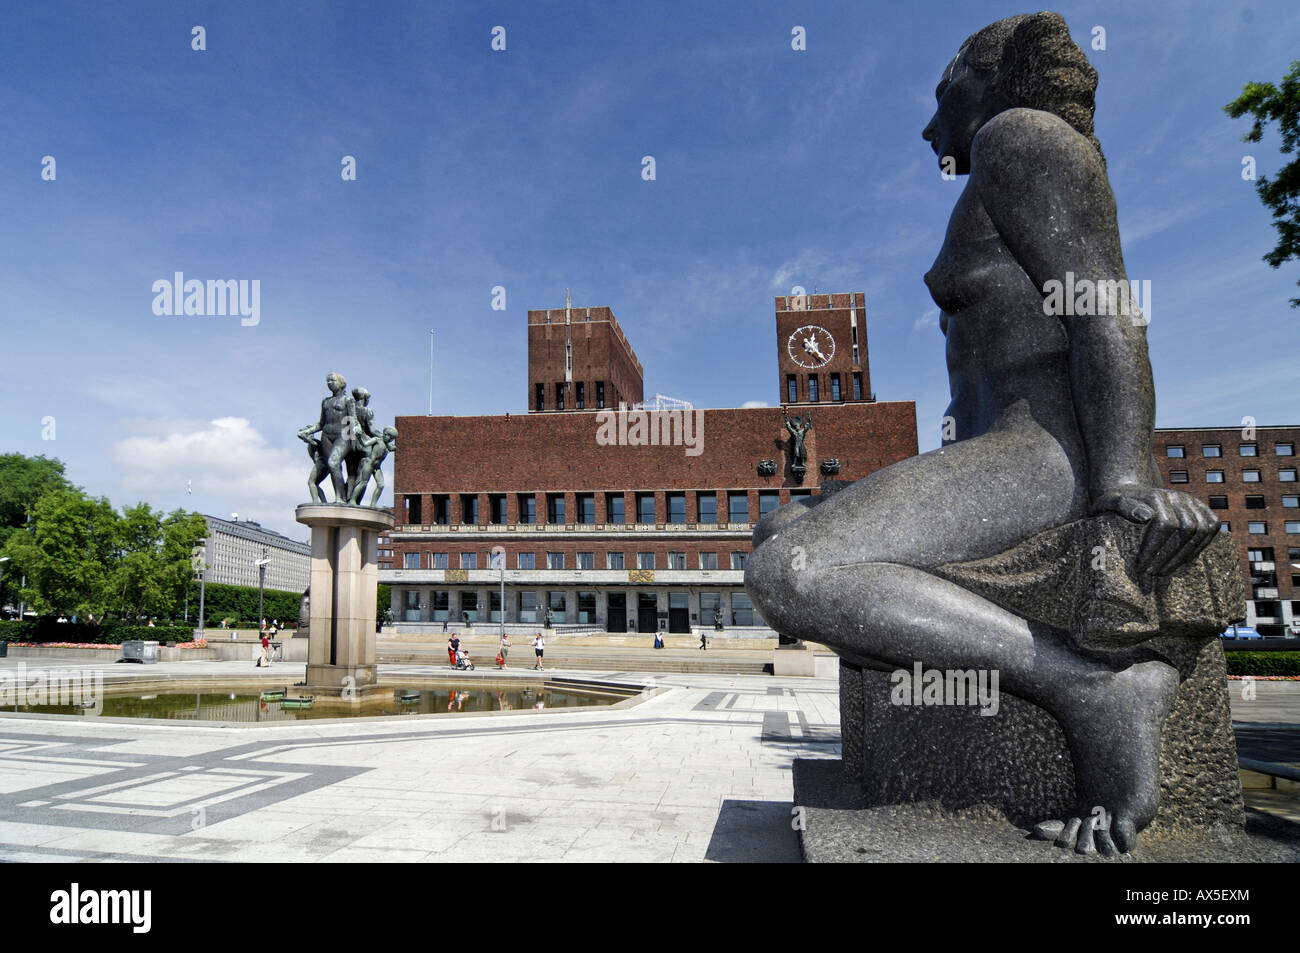 Vigeland sculpture at the town hall square in front of Oslo's town hall, Norway, Scandinavia, Europe Stock Photo